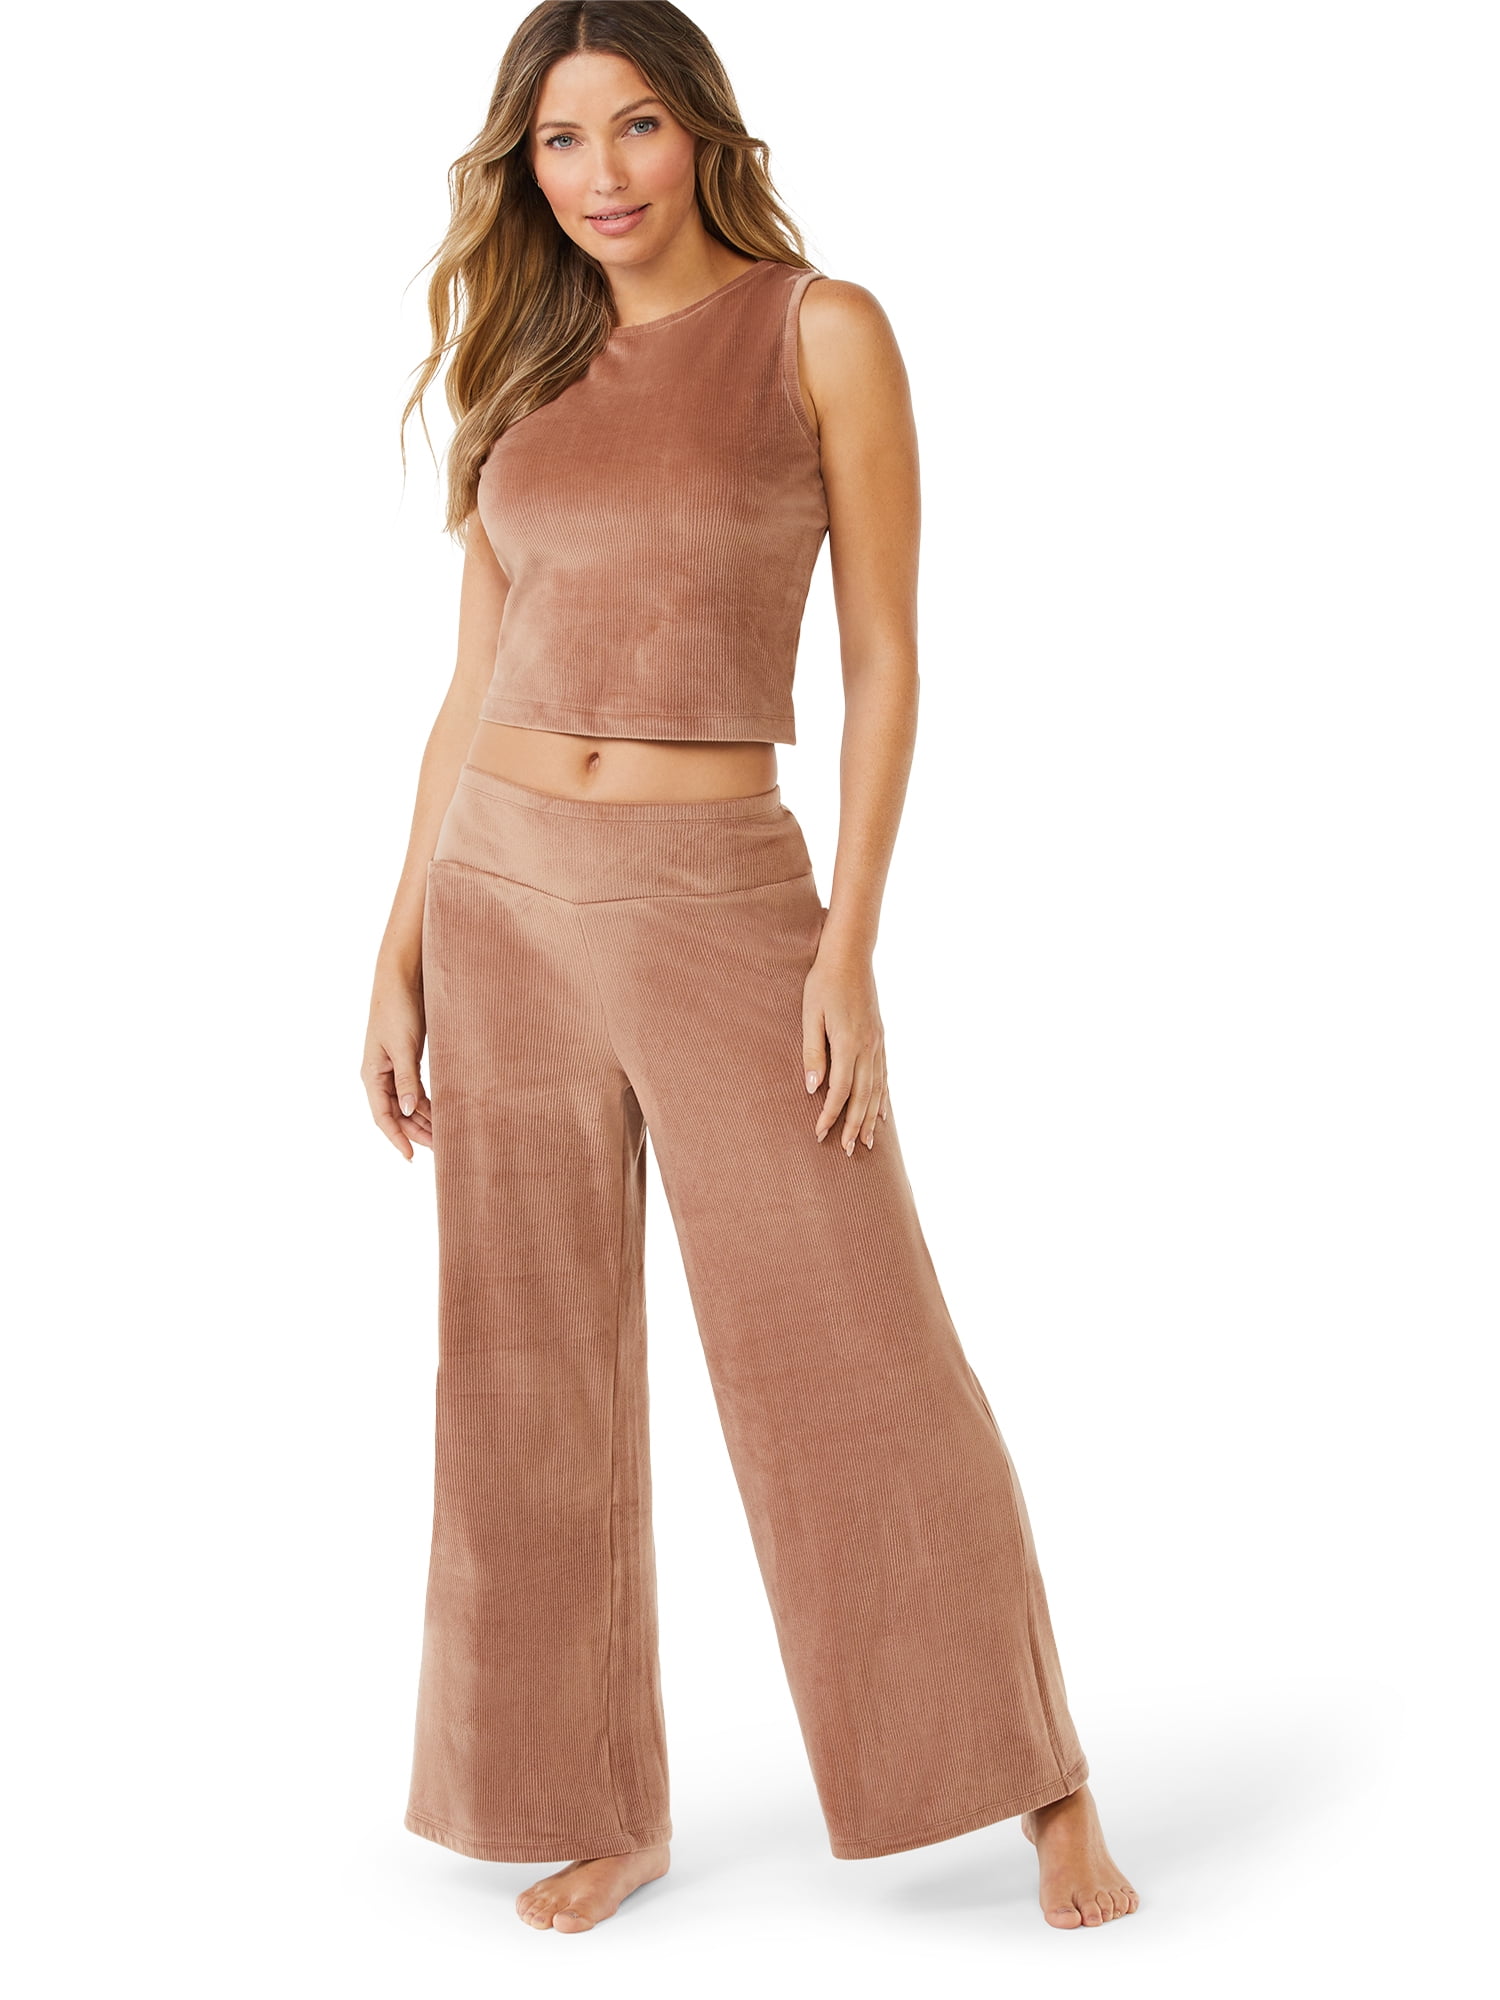 Pink Wind Womens 3 PCS Outfit Vest Tank Top and High Waist Wide Leg Pants Set with Long Cardigan